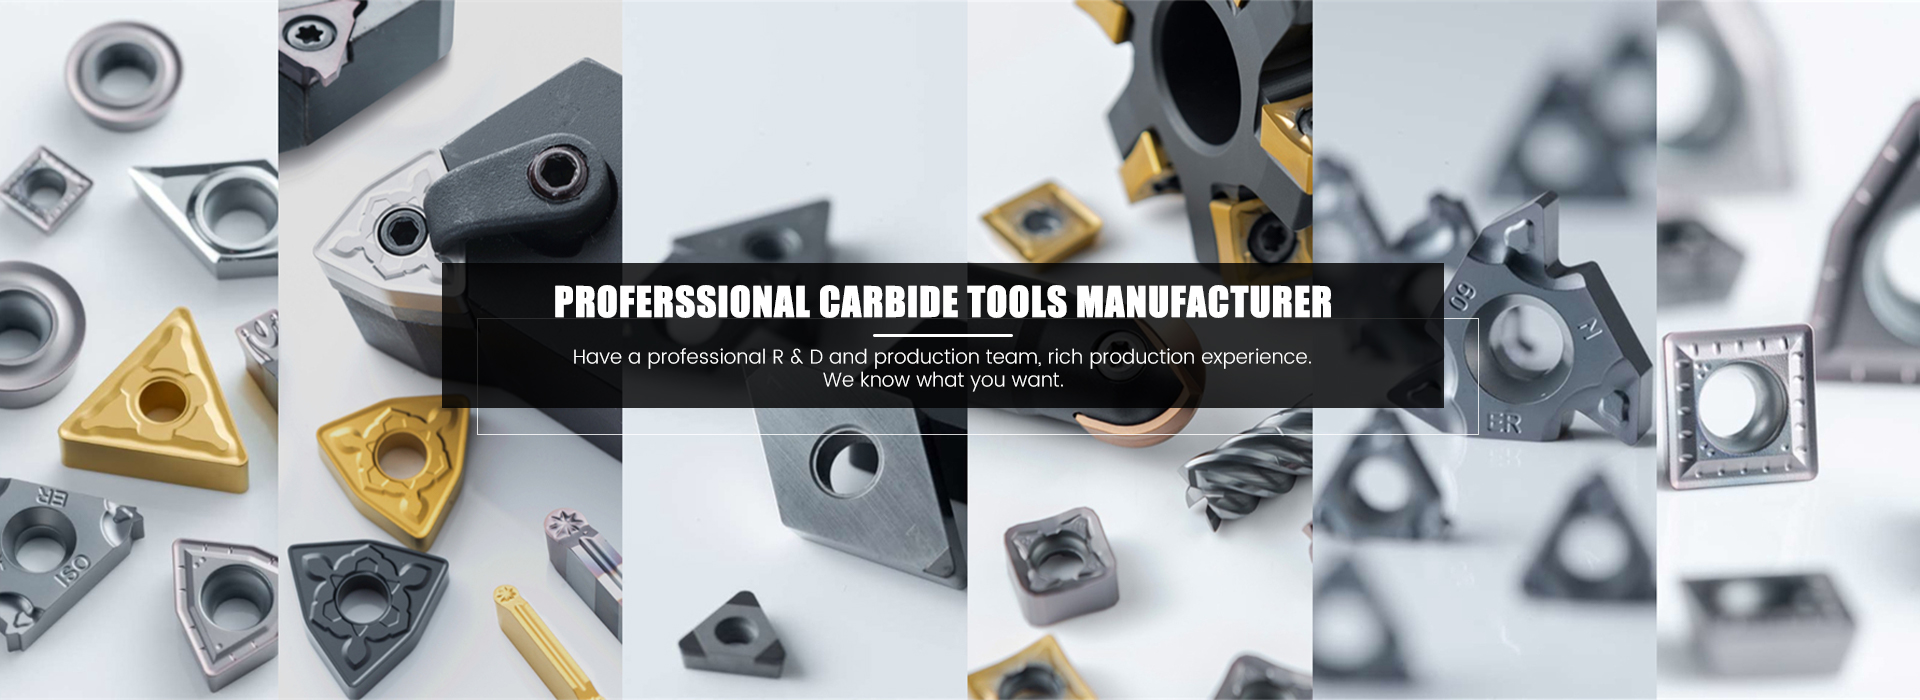 CNC Cutting Inserts, Carbide End Mills, Carbide Plates - Buytop